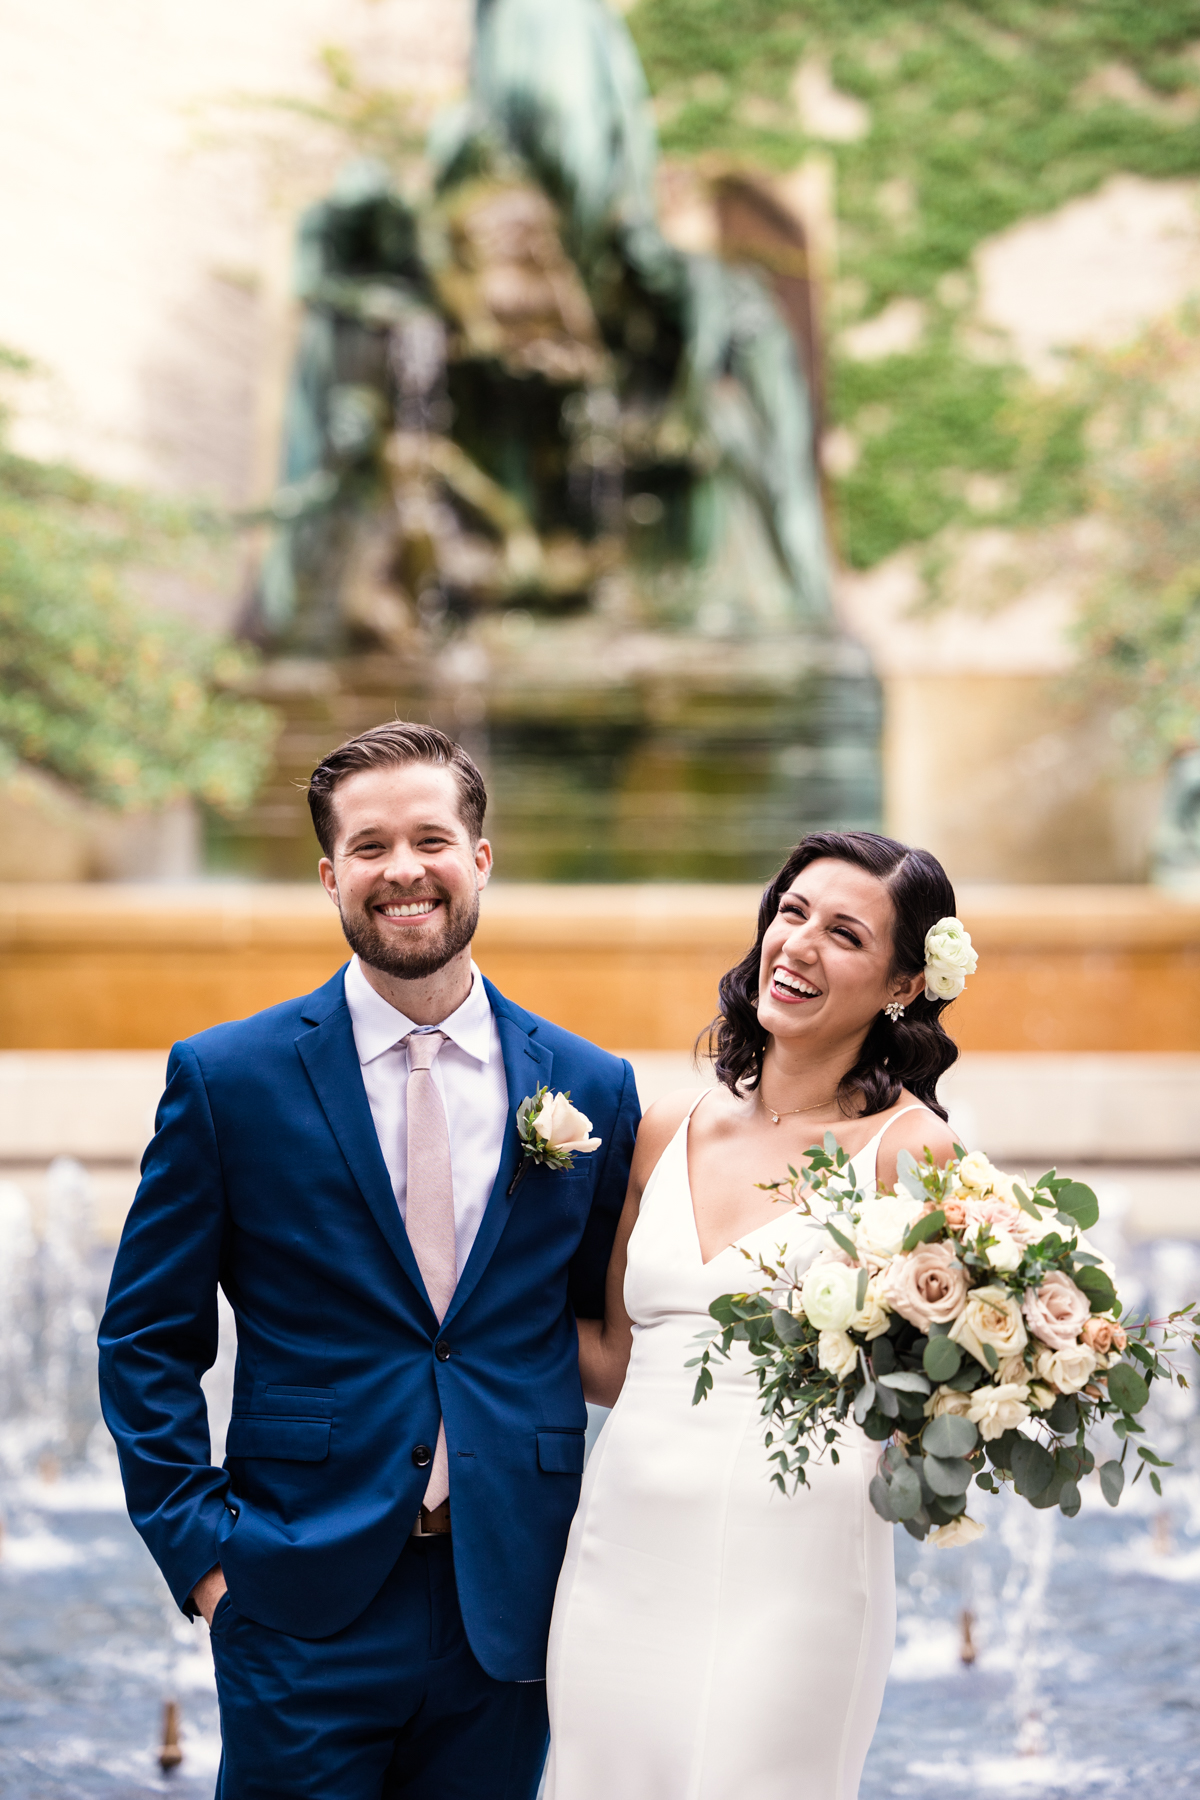 Candid photo of bride and groom in the Art Institute of Chicago gardens before September elopement